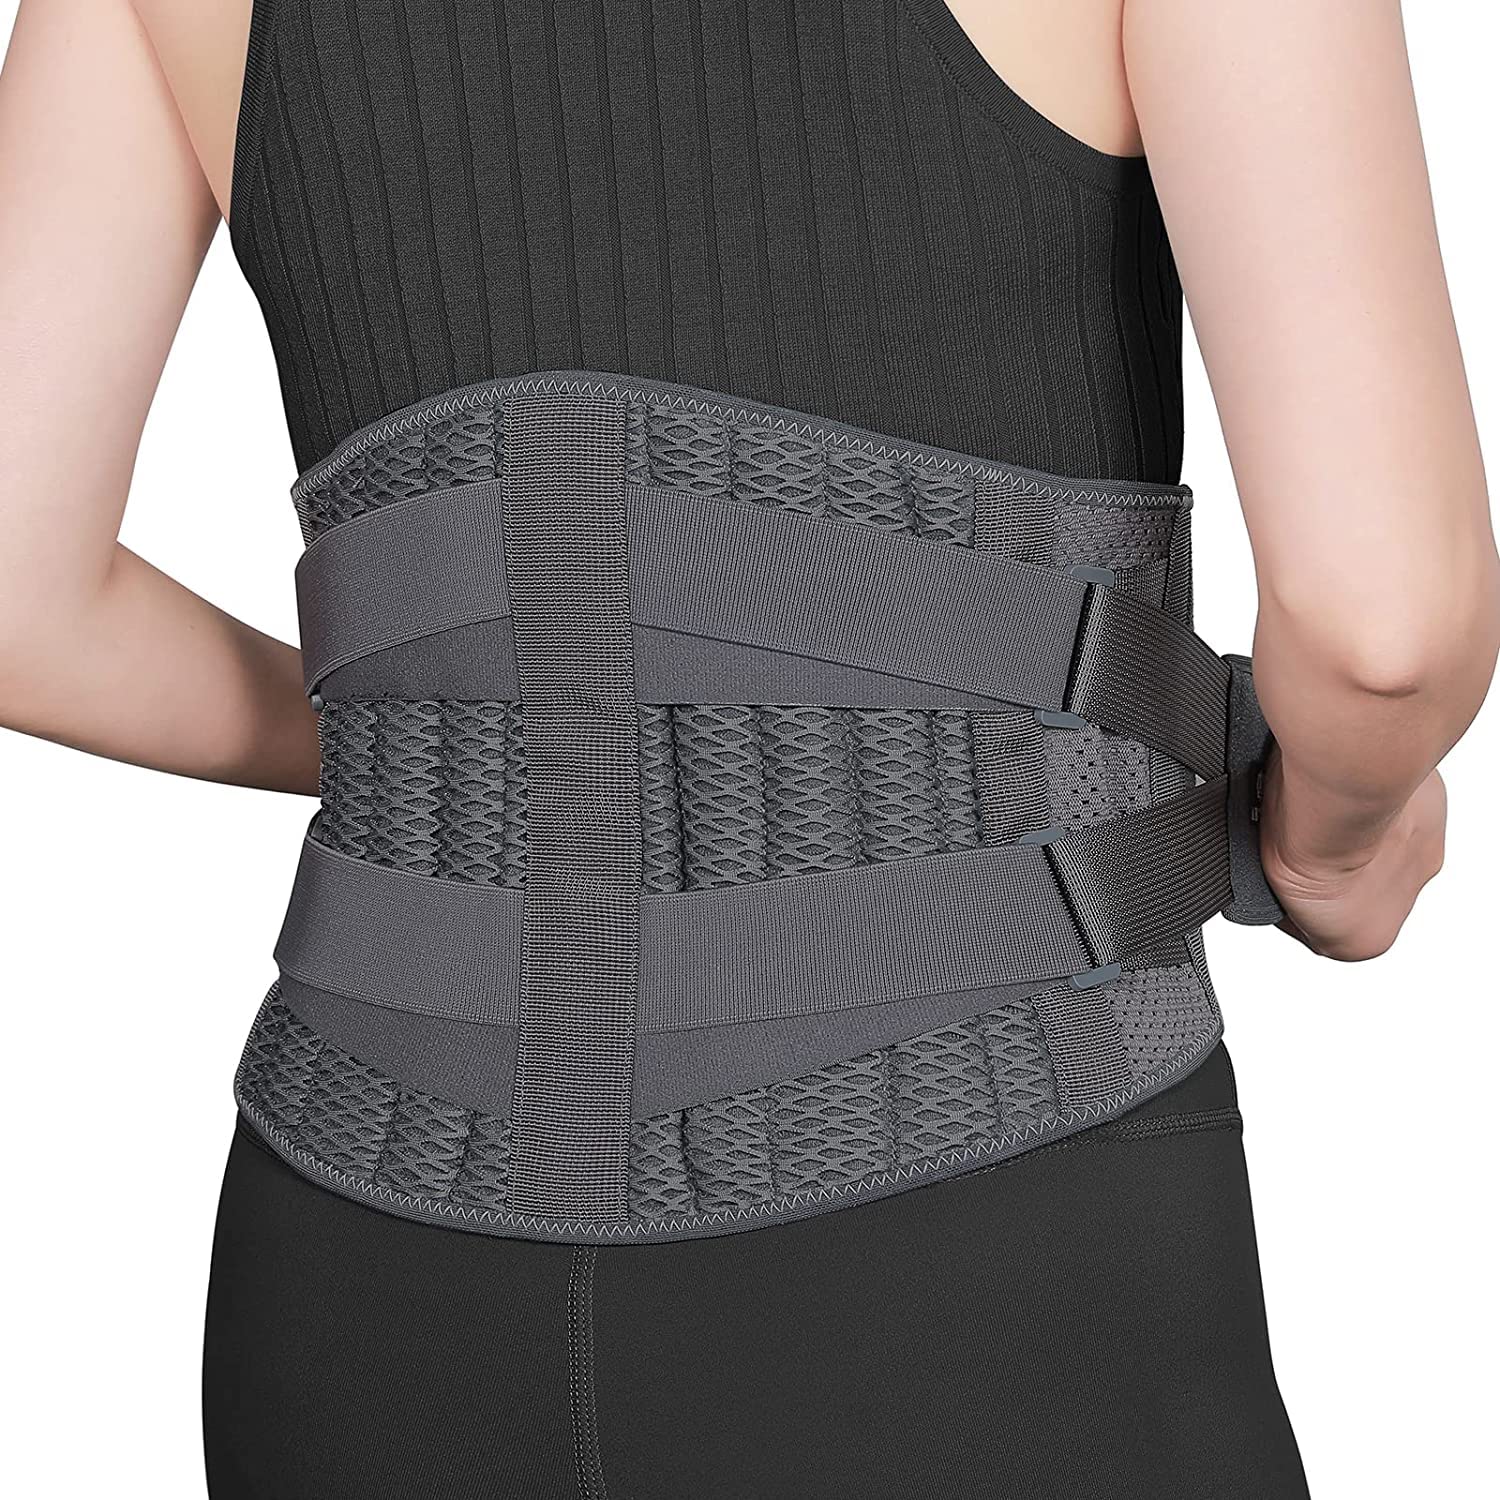 Lower Back Brace Lumbar Support - Adjustable Air Mesh Back Brace with 5  Stays for Lower Back Pain Relief, Herniated Disc, Sciatica, Scoliosis, Lower  Back Support Belt for Men Women Work [Size